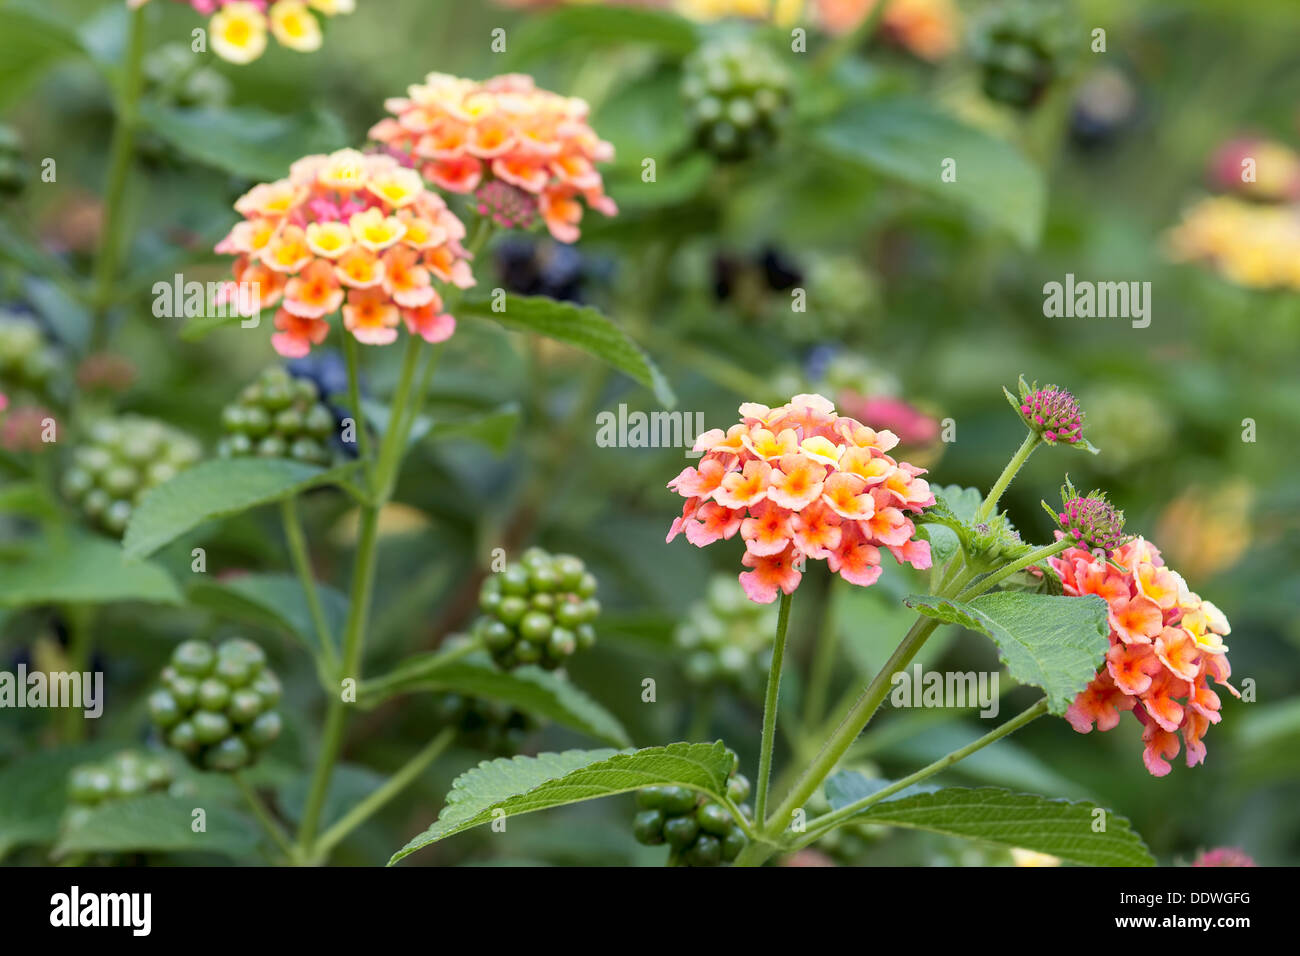 Lantana Flowers and Berries Plant Bushes in Garden Stock Photo